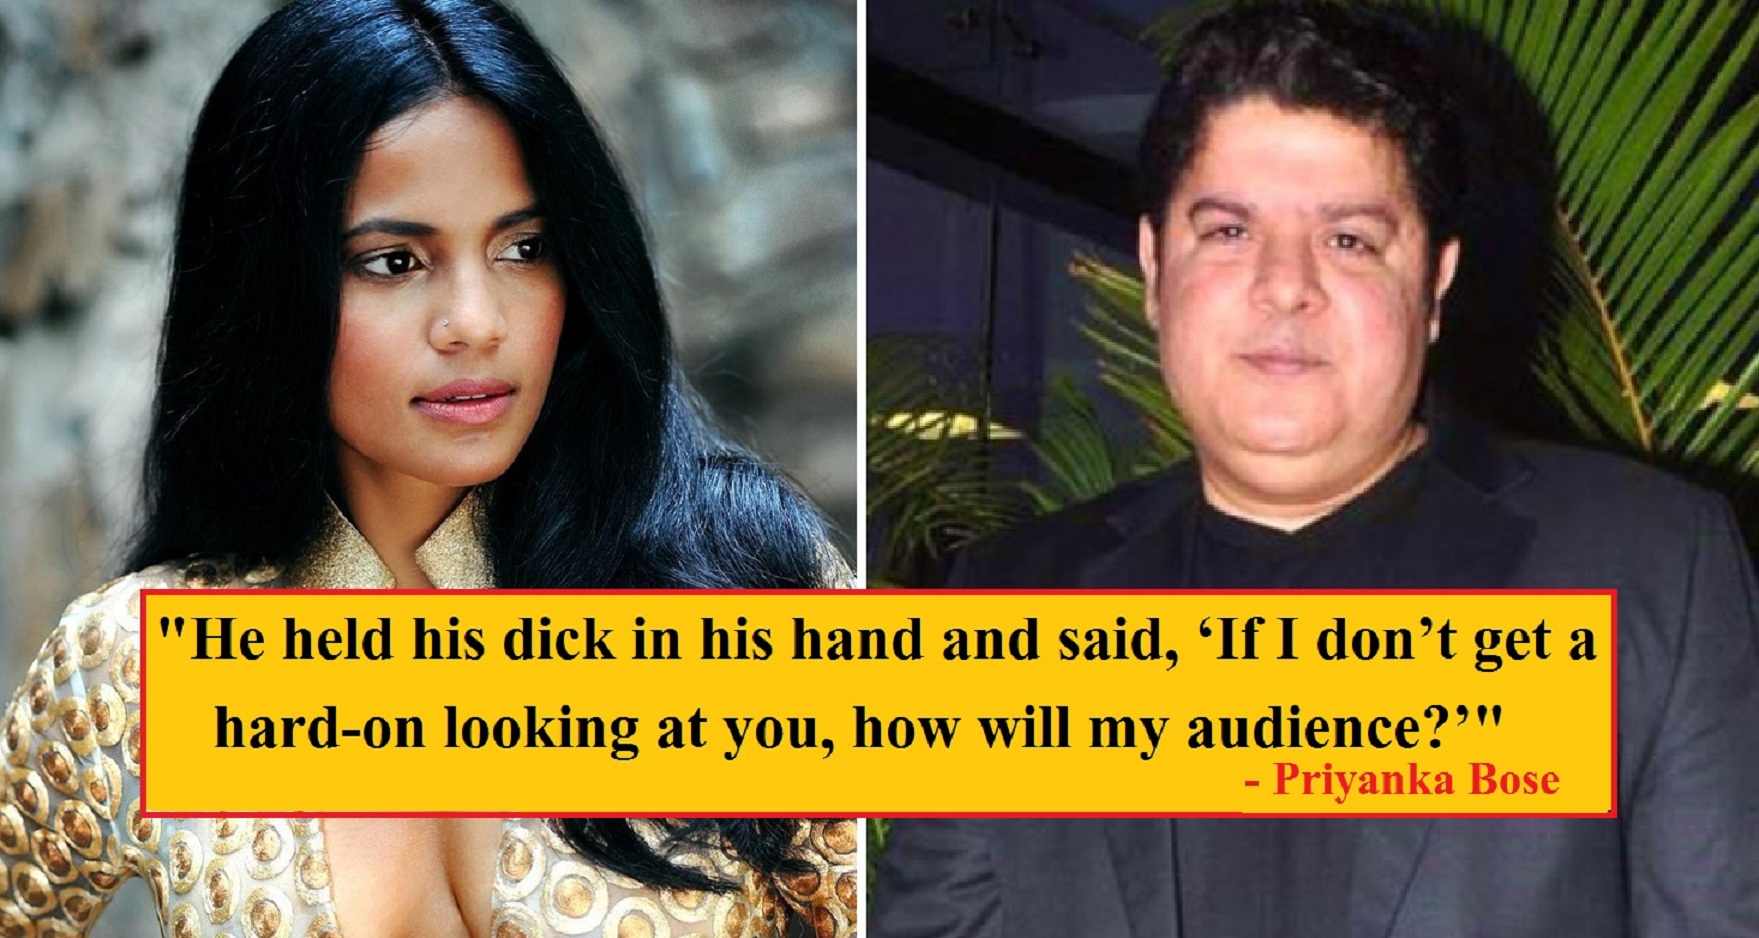 Sajid Khan Accused Of Taking His D*ck Out In Front of Actress, Priyanka Bose, #MeToo